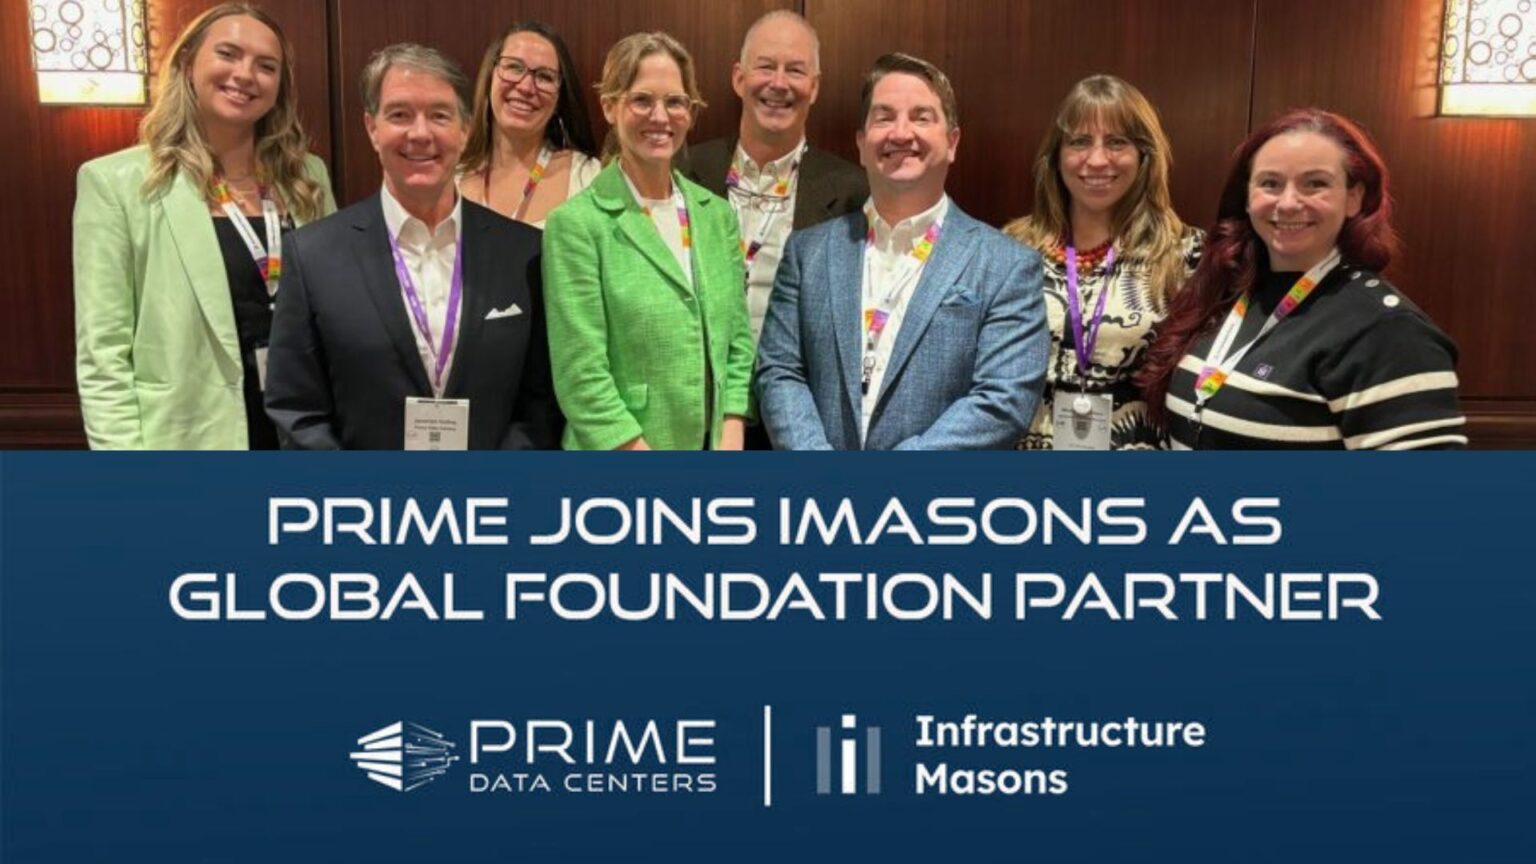 Prime Data Centers Joins Infrastructure Masons as Global Foundation Partner